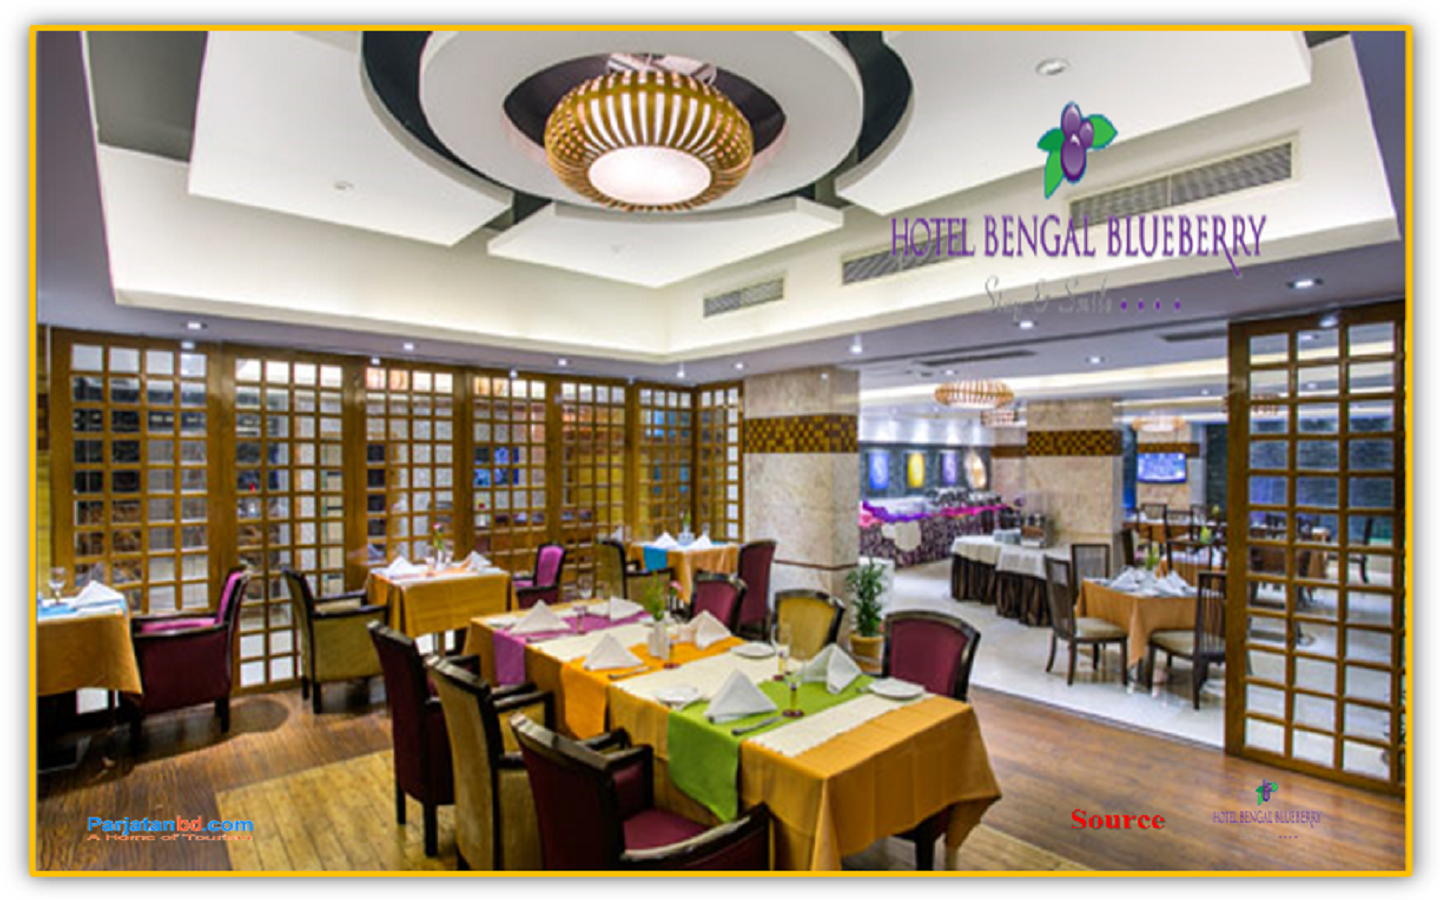 Hotel Bengal Blueberry, Gulshan 2 Picture-1